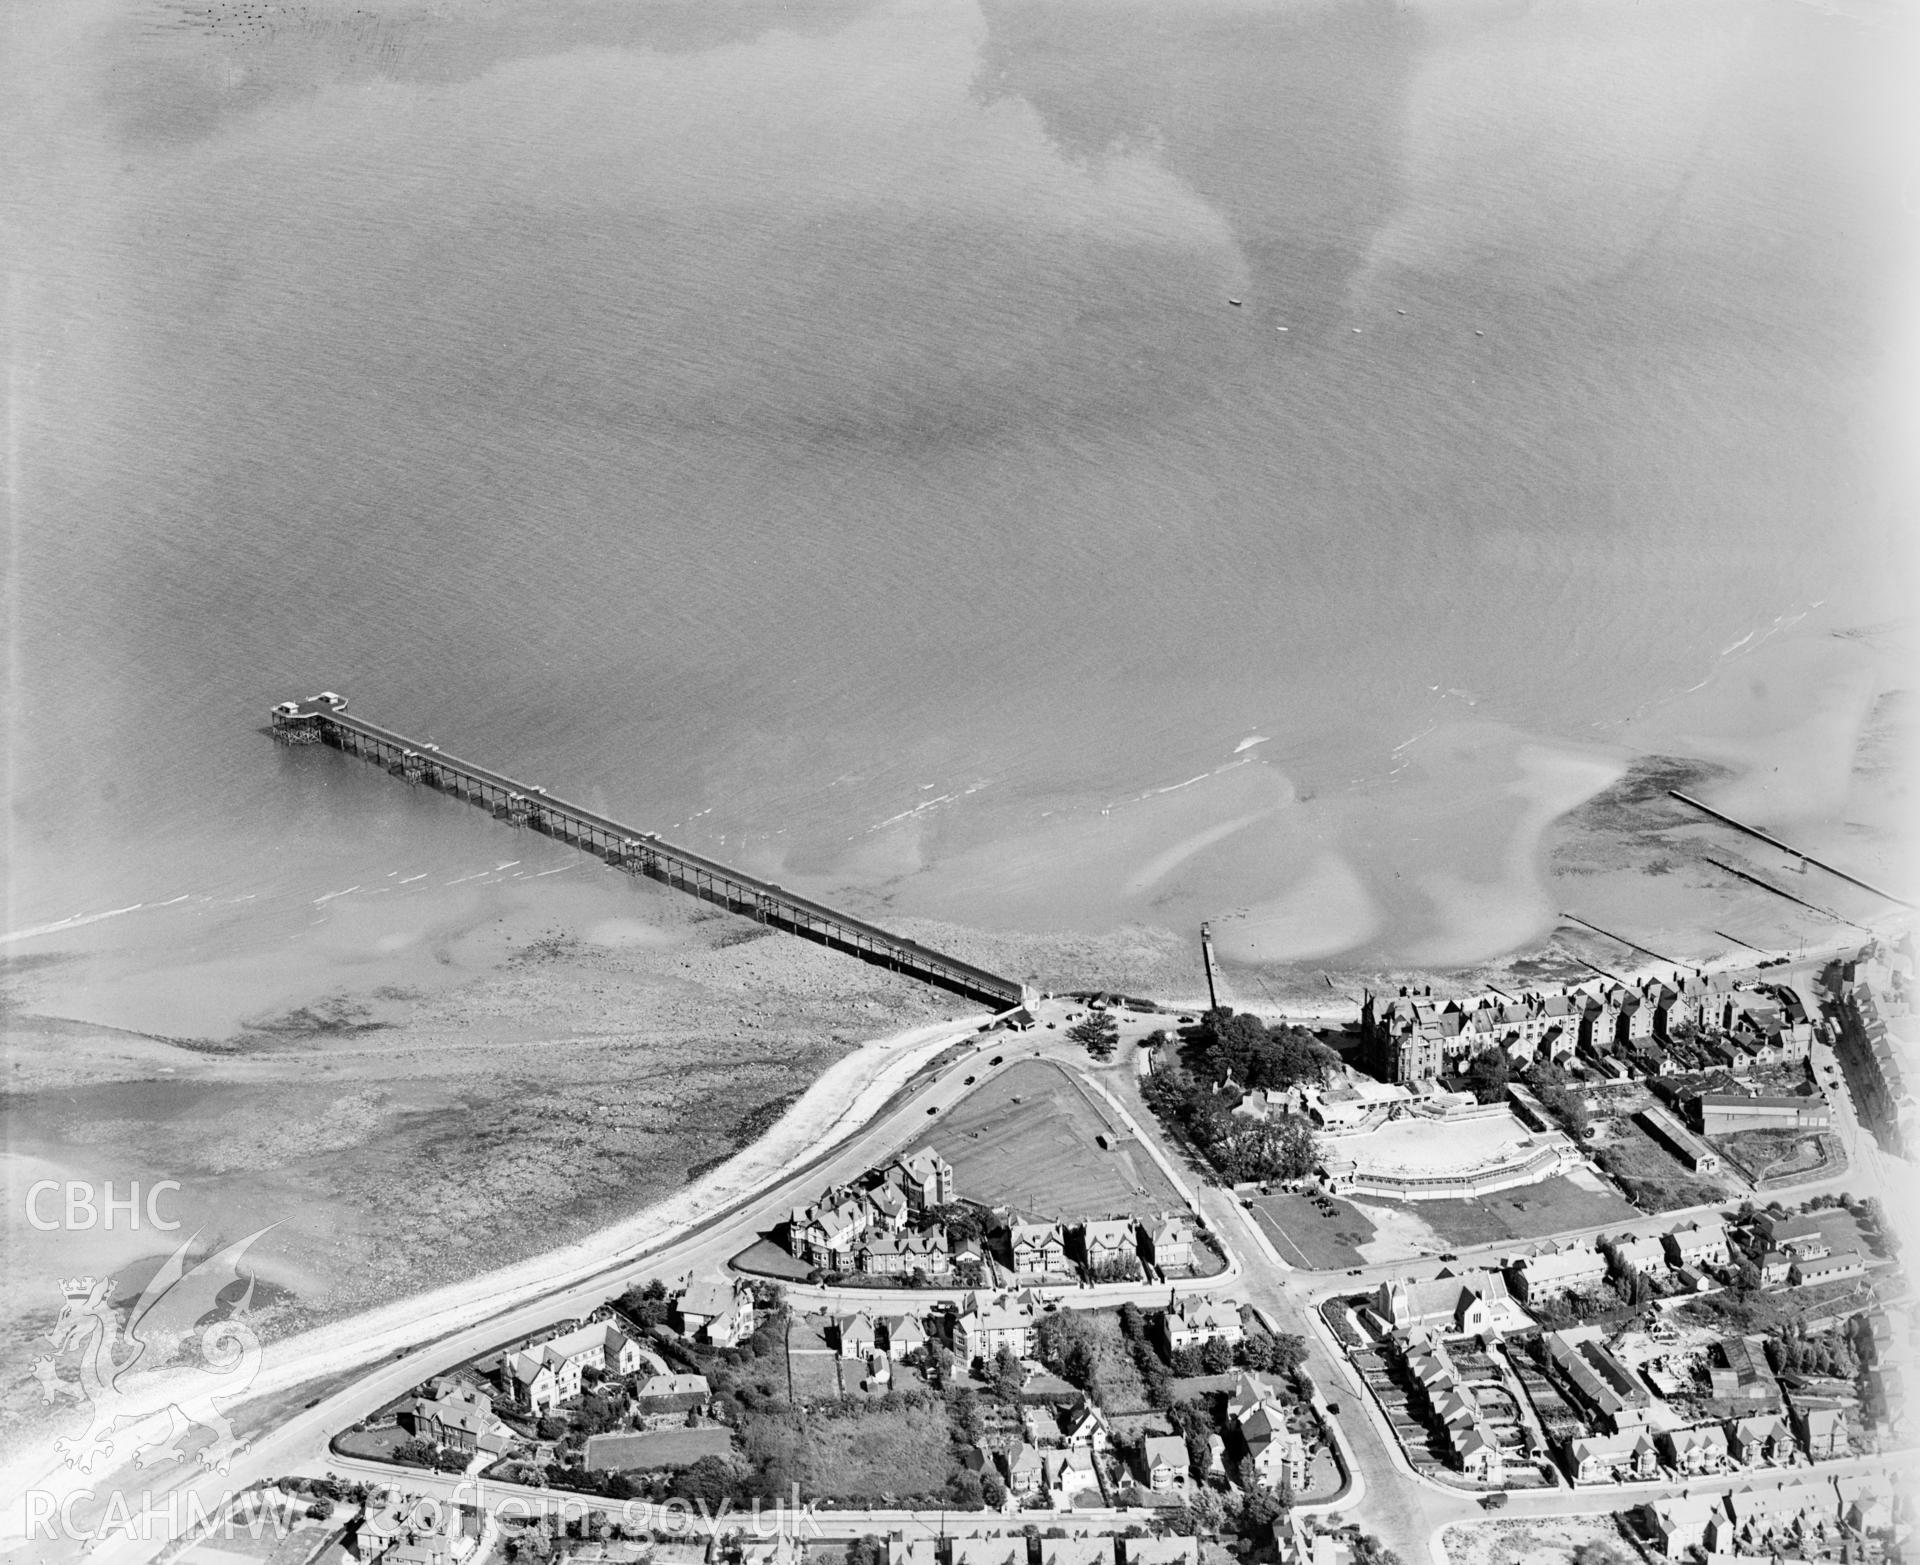 View of Rhos-on-Sea showing swimming pool, pier, housing and pumping station, oblique aerial view. 5?x4? black and white glass plate negative.